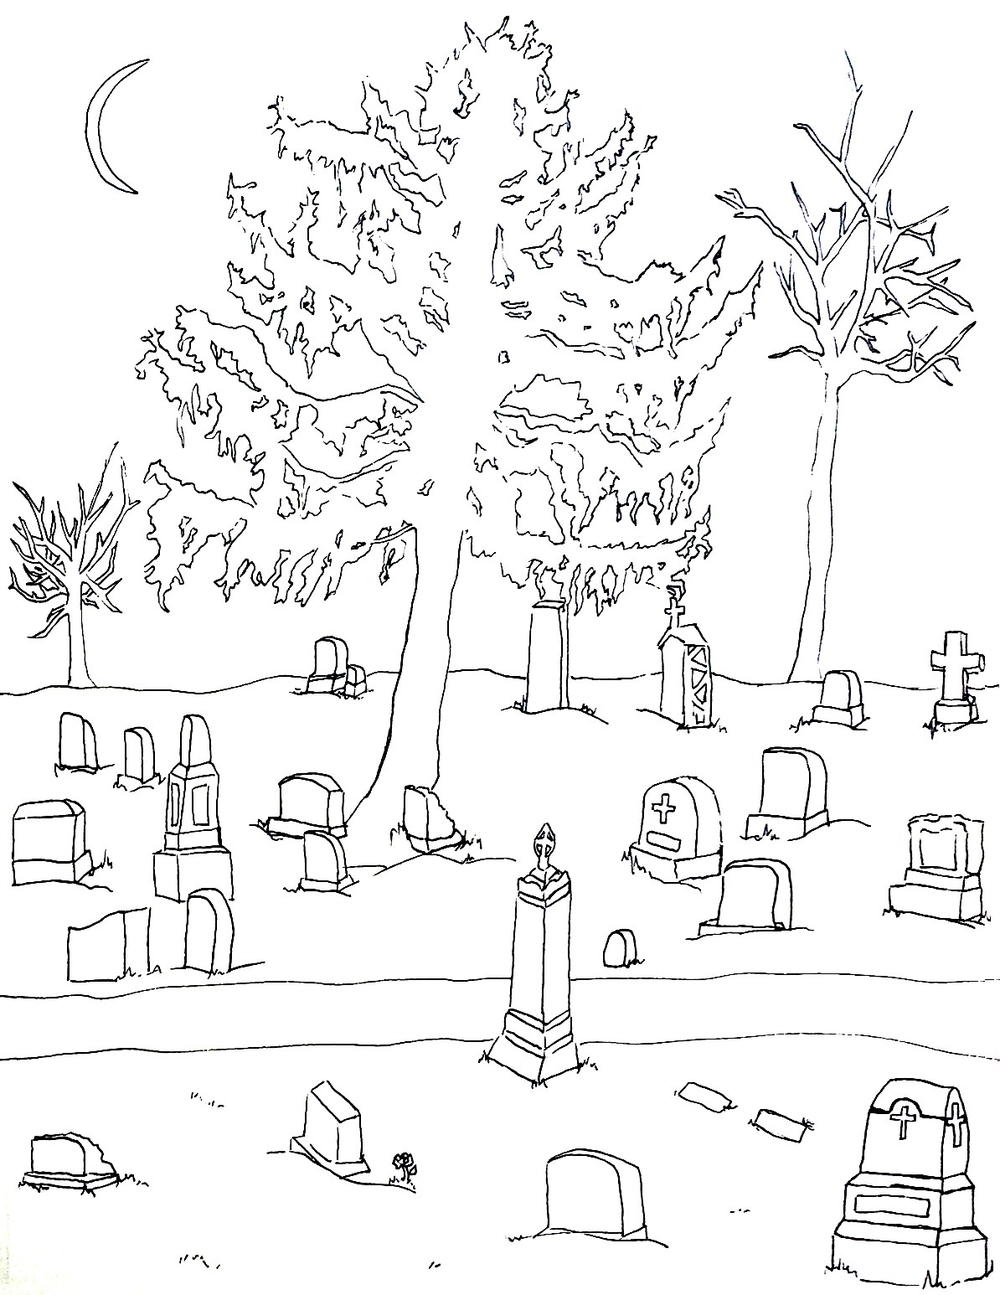 Cemetery Halloween Coloring Page | FaveCrafts.com